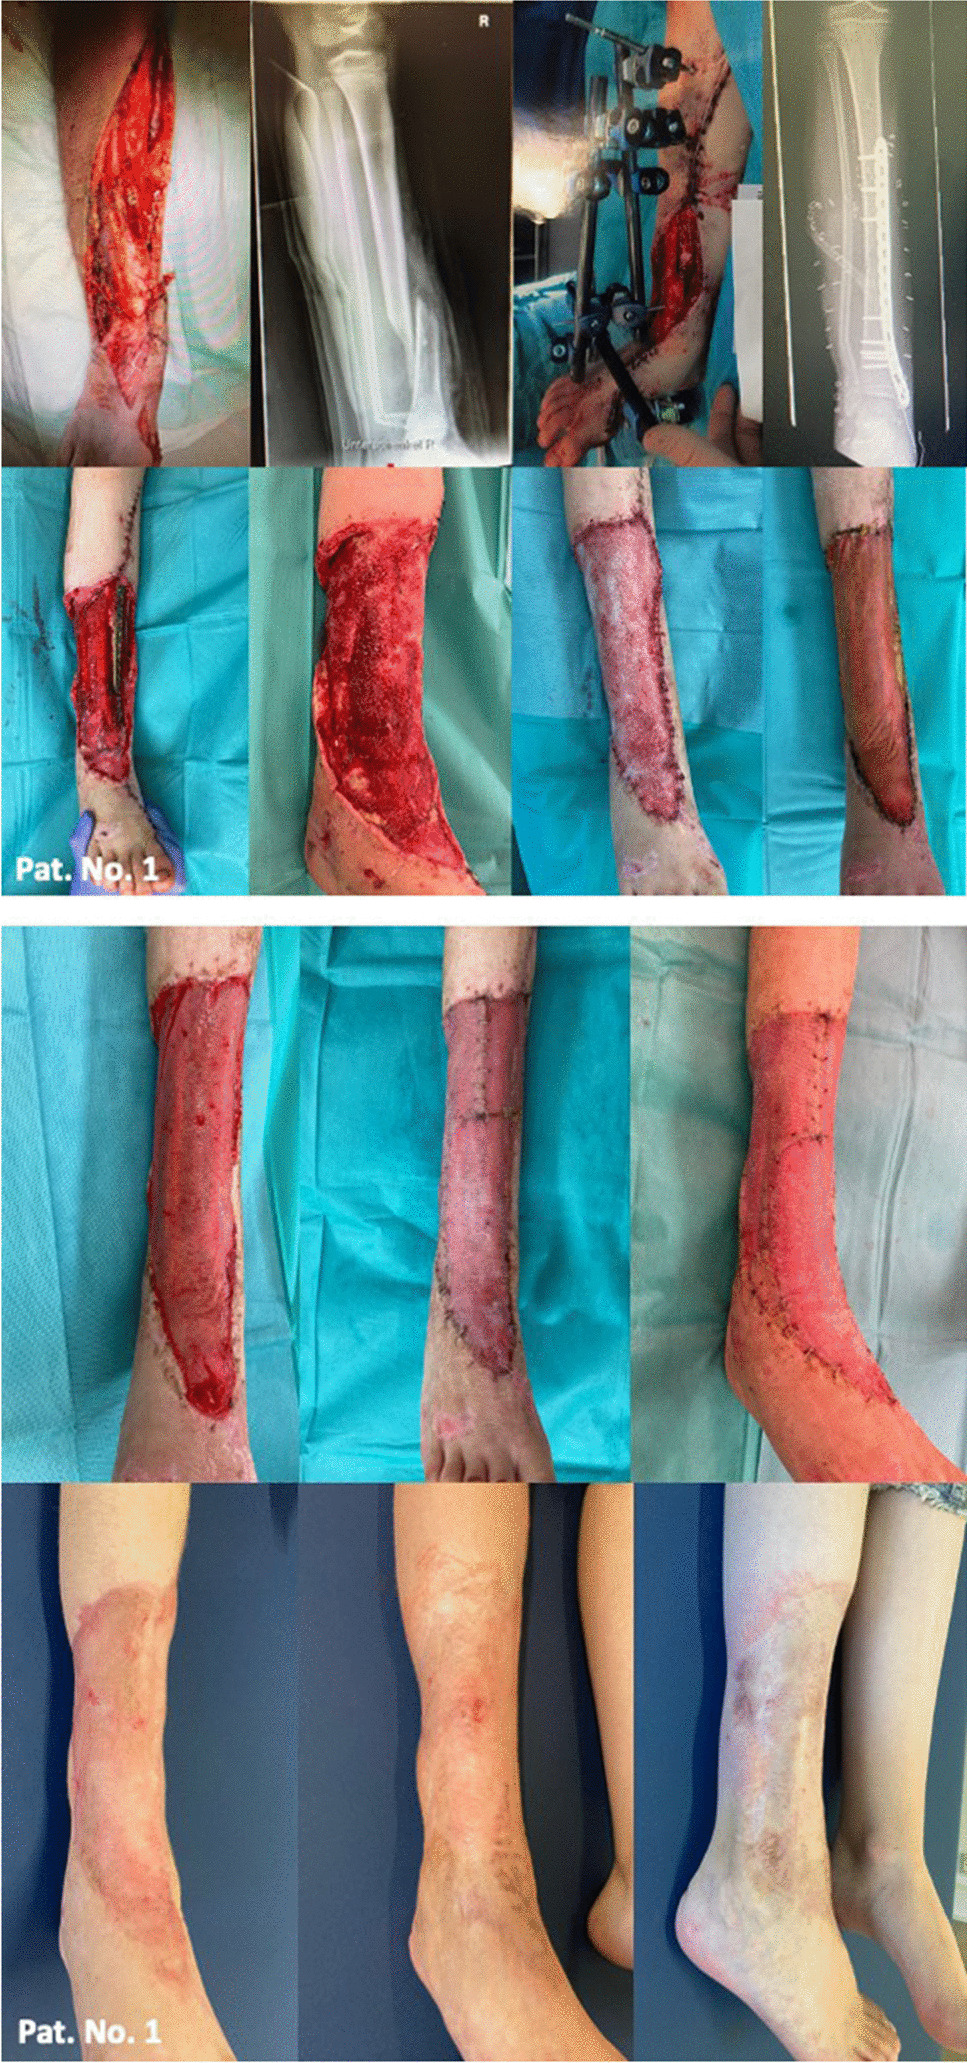 NovoSorb® Biodegradable Temporizing Matrix: a novel approach for treatment of extremity avulsion injuries in children